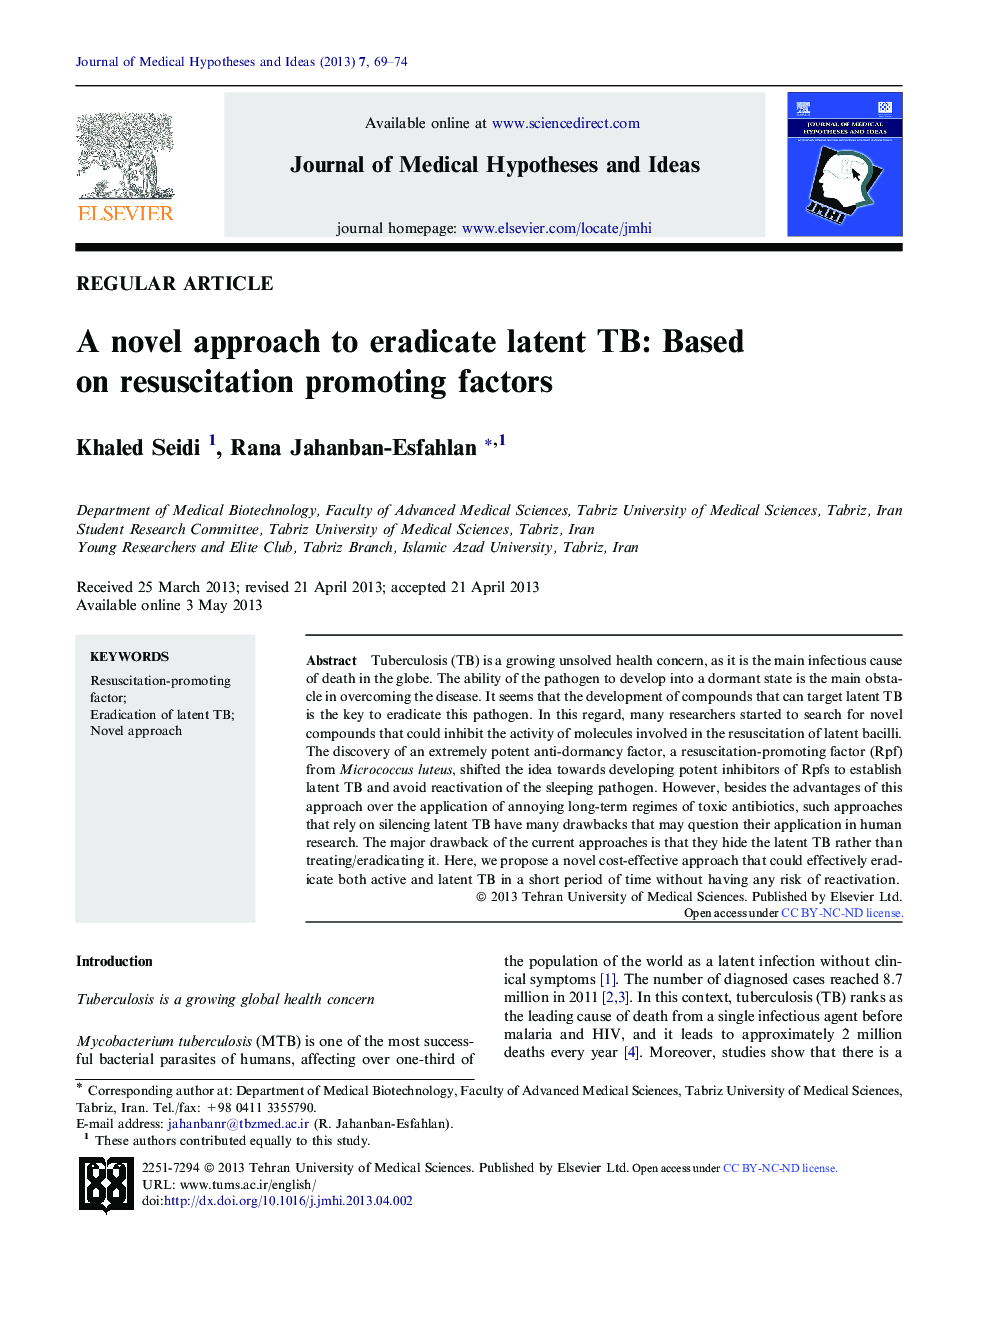 A novel approach to eradicate latent TB: Based on resuscitation promoting factors 